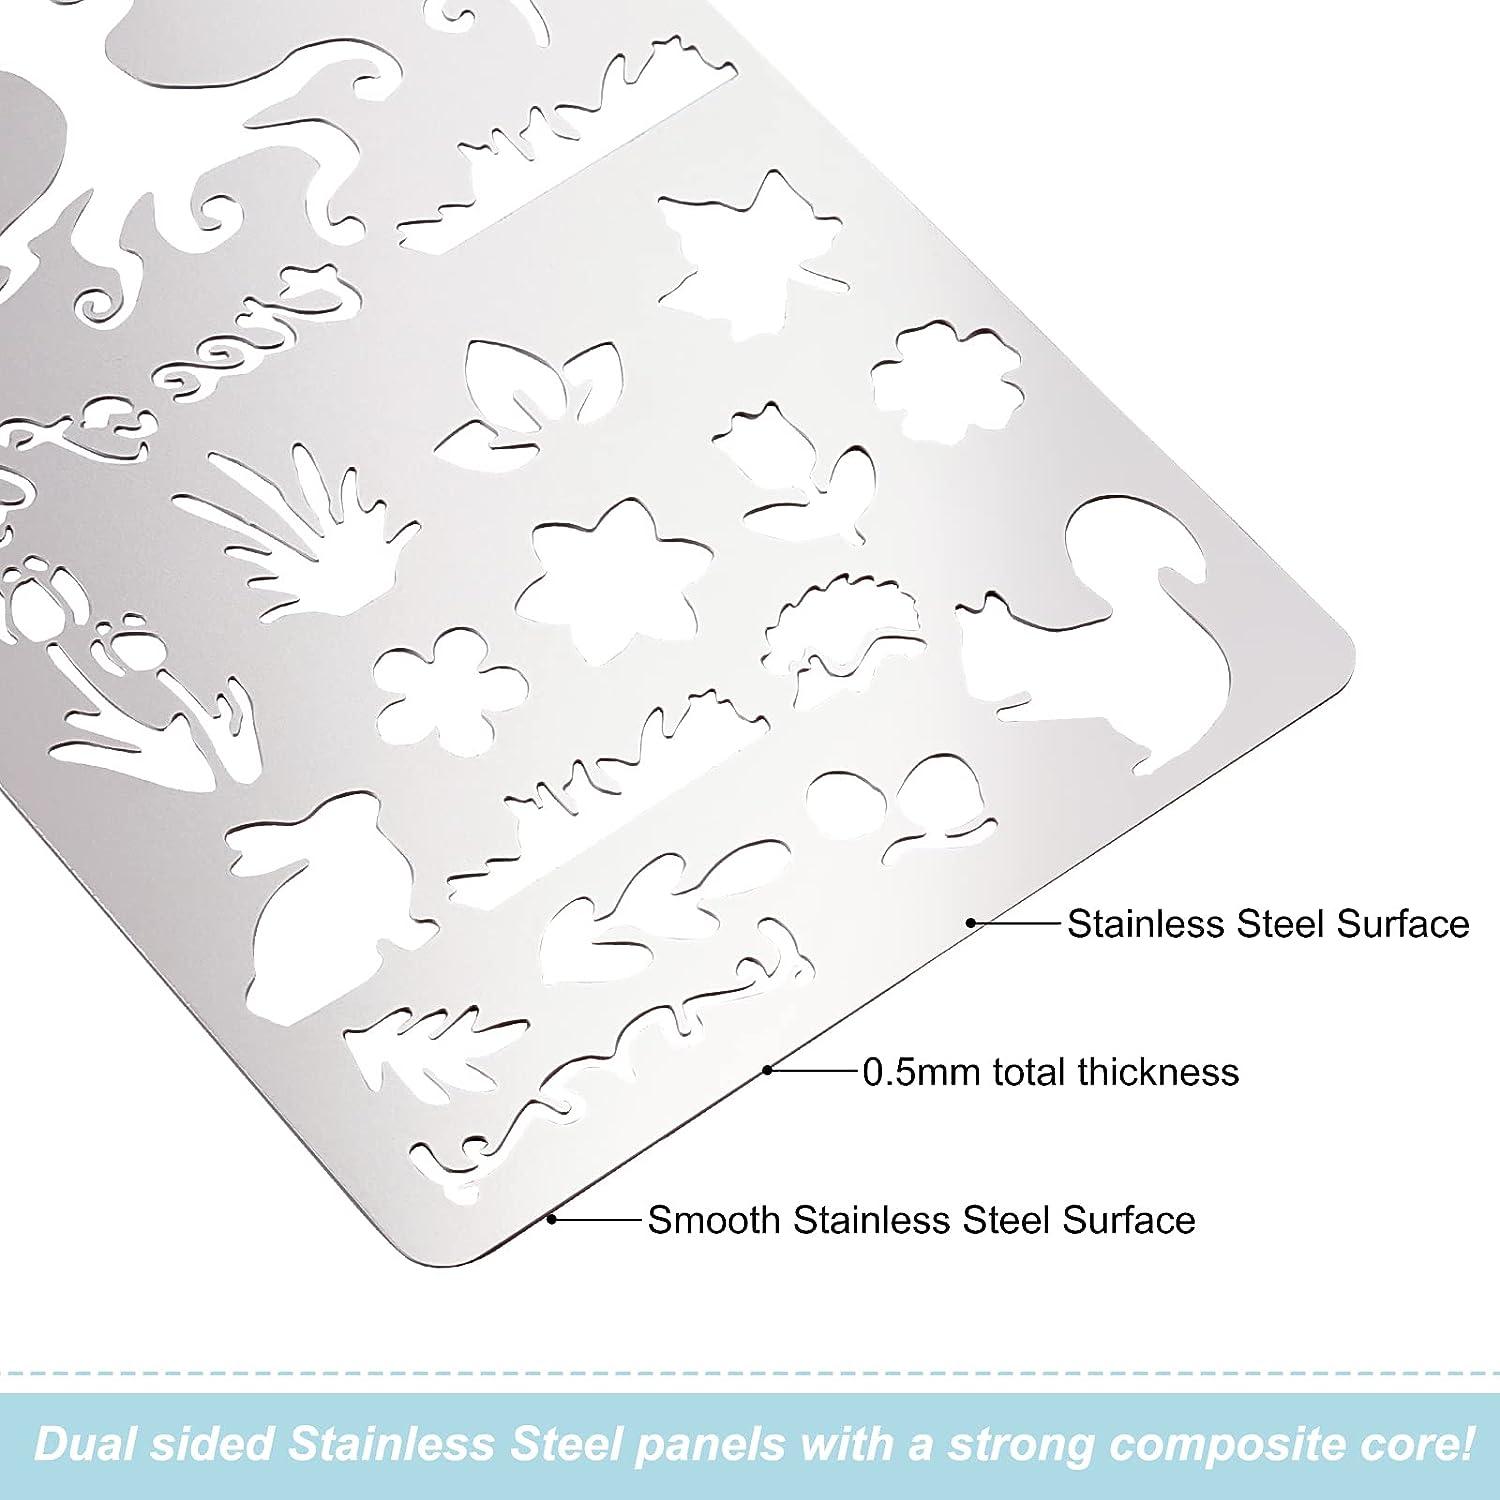 Wood Burning Stencil Flowers Stainless Steel Metal Stencils Template for  Wood Carving Drawing Engraving and Scrapbooking Project 